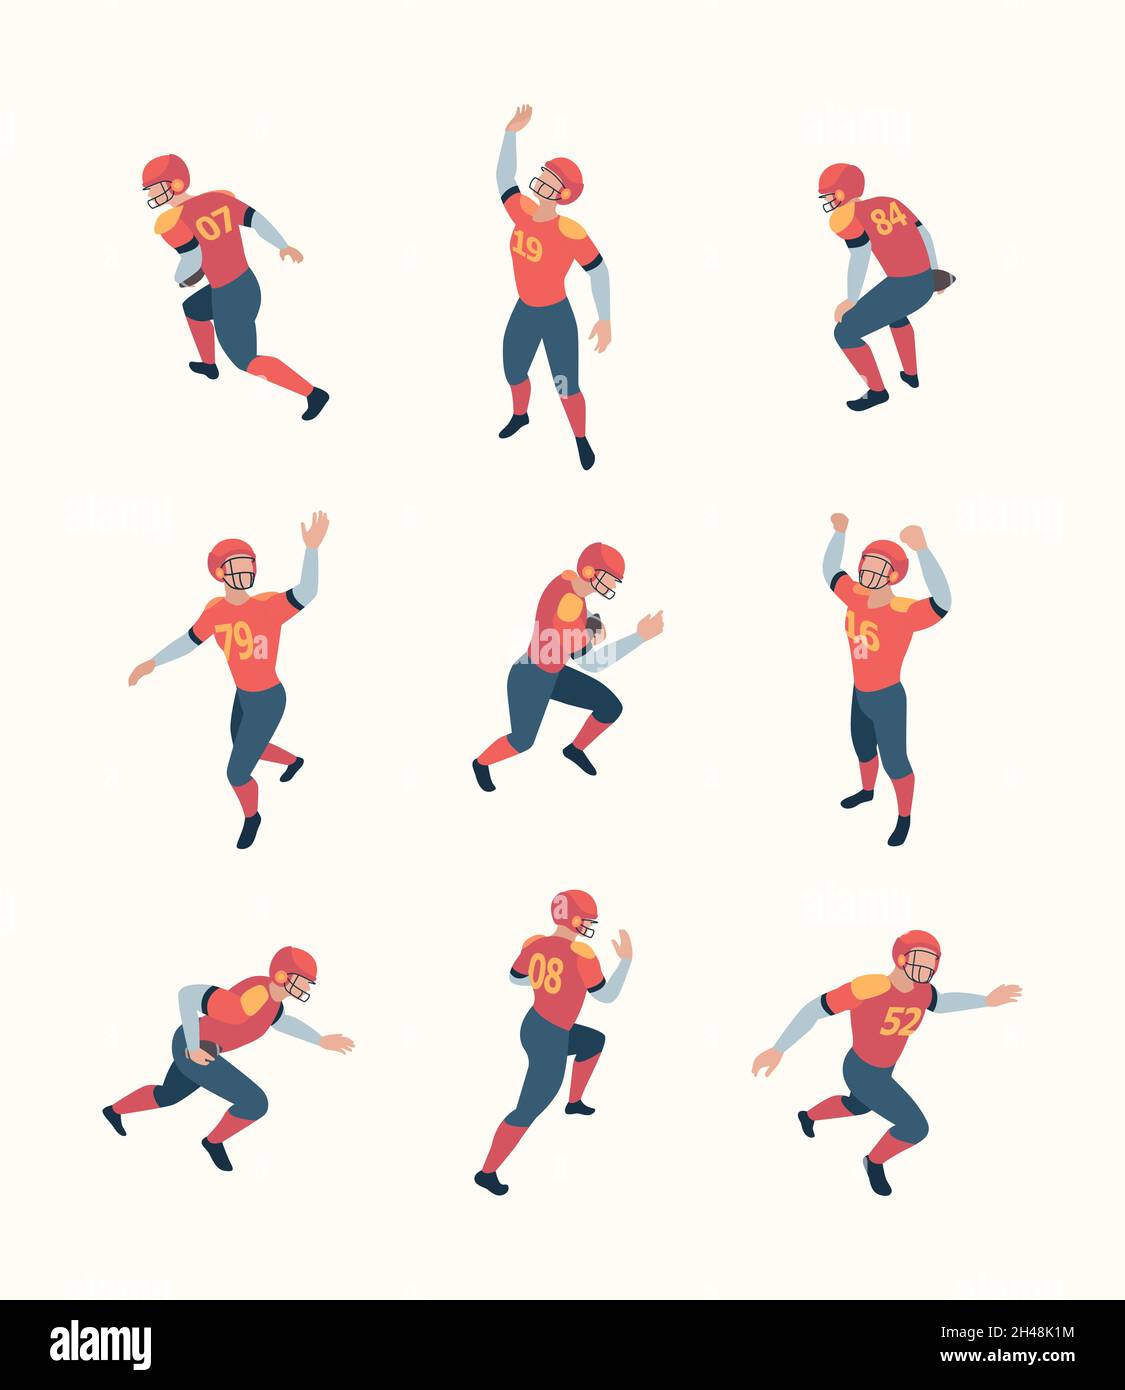 American football players. Isometric persons with ball in dynamic poses sport people playing standing holding running jumping garish vector 3d Stock Vector